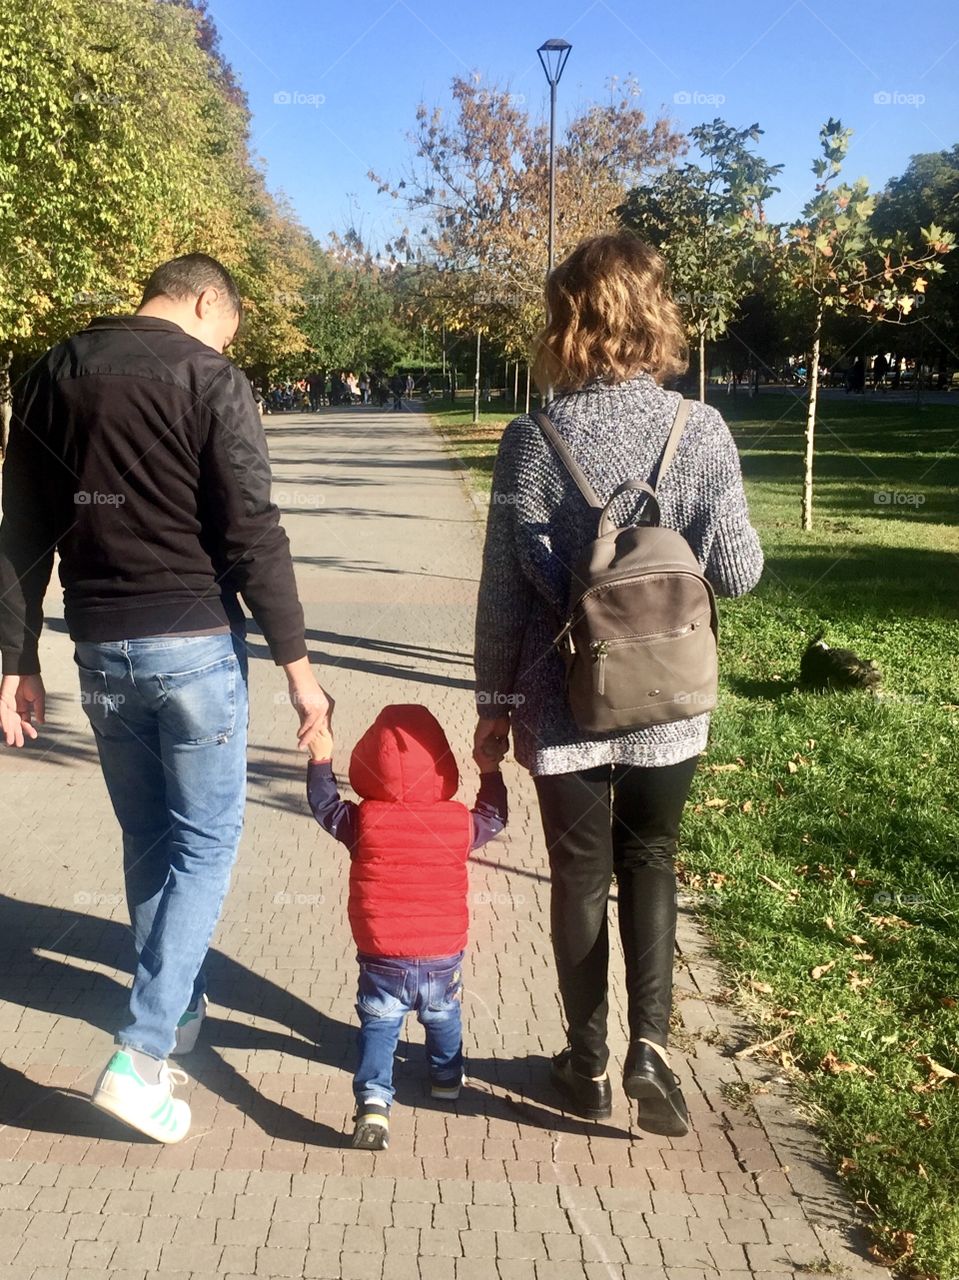 Backside view of young family walking in a park in a sunny day